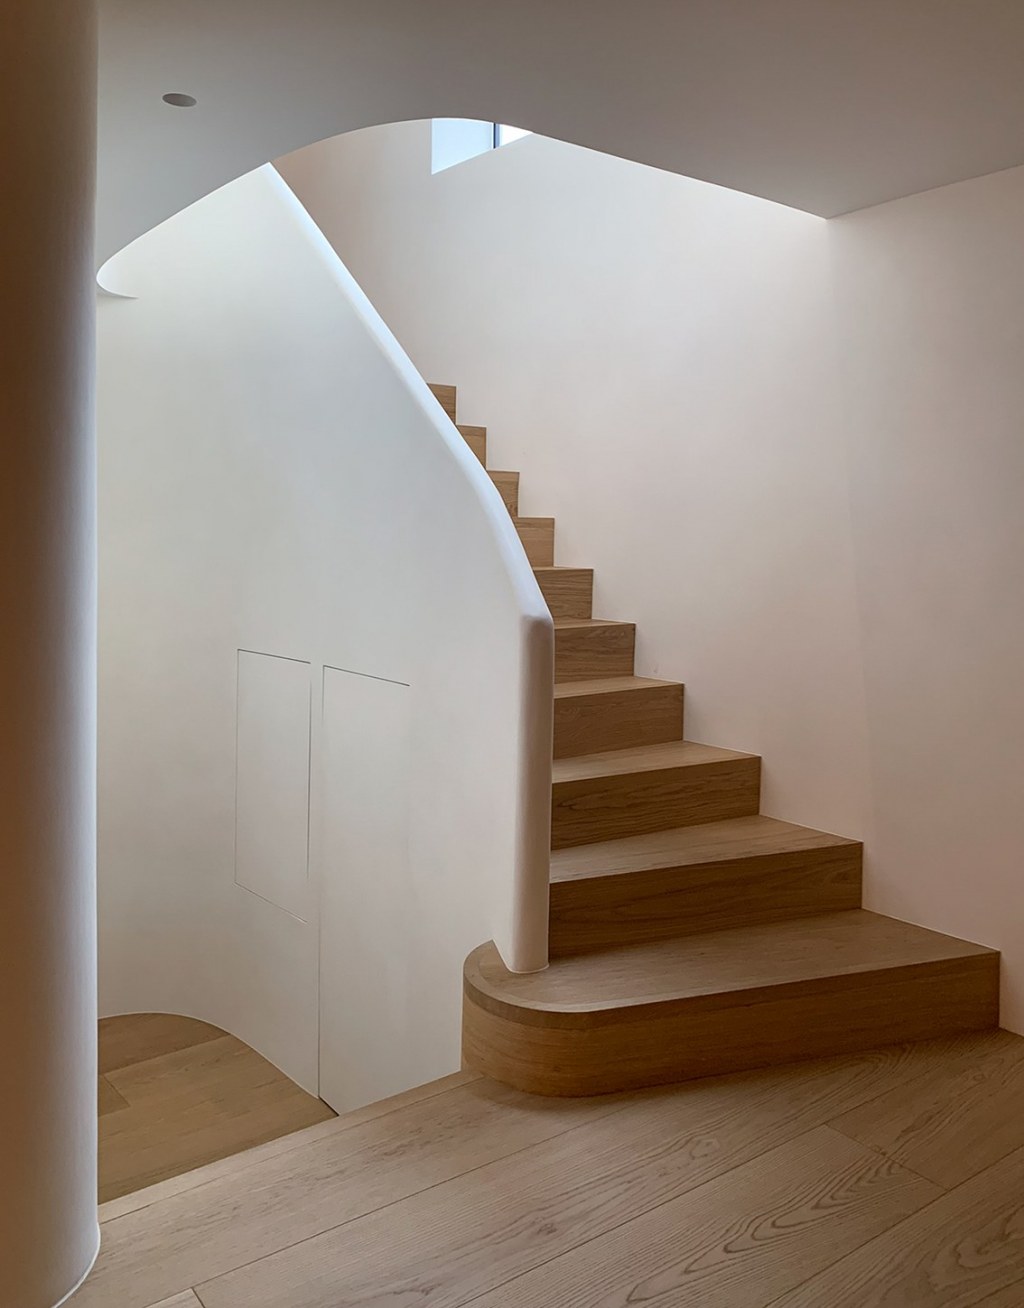 Sloane Square Townhouse / Main stair